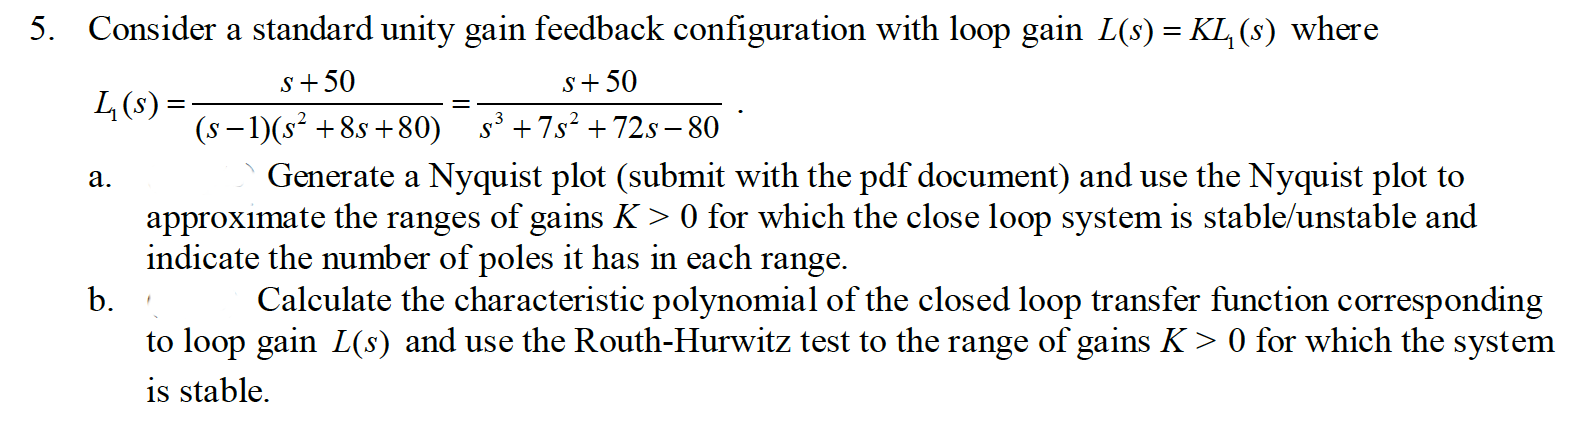 5. Consider a standard unity gain feedback configuration with loop gain L(8) = KL, (8) where
L(s) =:
s+50
S+ 50
(s- 1)(s* +8s +80) s +7s? + 72s - 80
Generate a Nyquist plot (submit with the pdf document) and use the Nyquist plot to
approximate the ranges of gains K > 0 for which the close loop system is stable/unstable and
indicate the number of poles it has in each range.
b.
Calculate the characteristic polynomial of the closed loop transfer function corresponding
to loop gain L(s) and use the Routh-Ilurwitz test to the range of gains K> 0 for which the system
is stable.
a.
